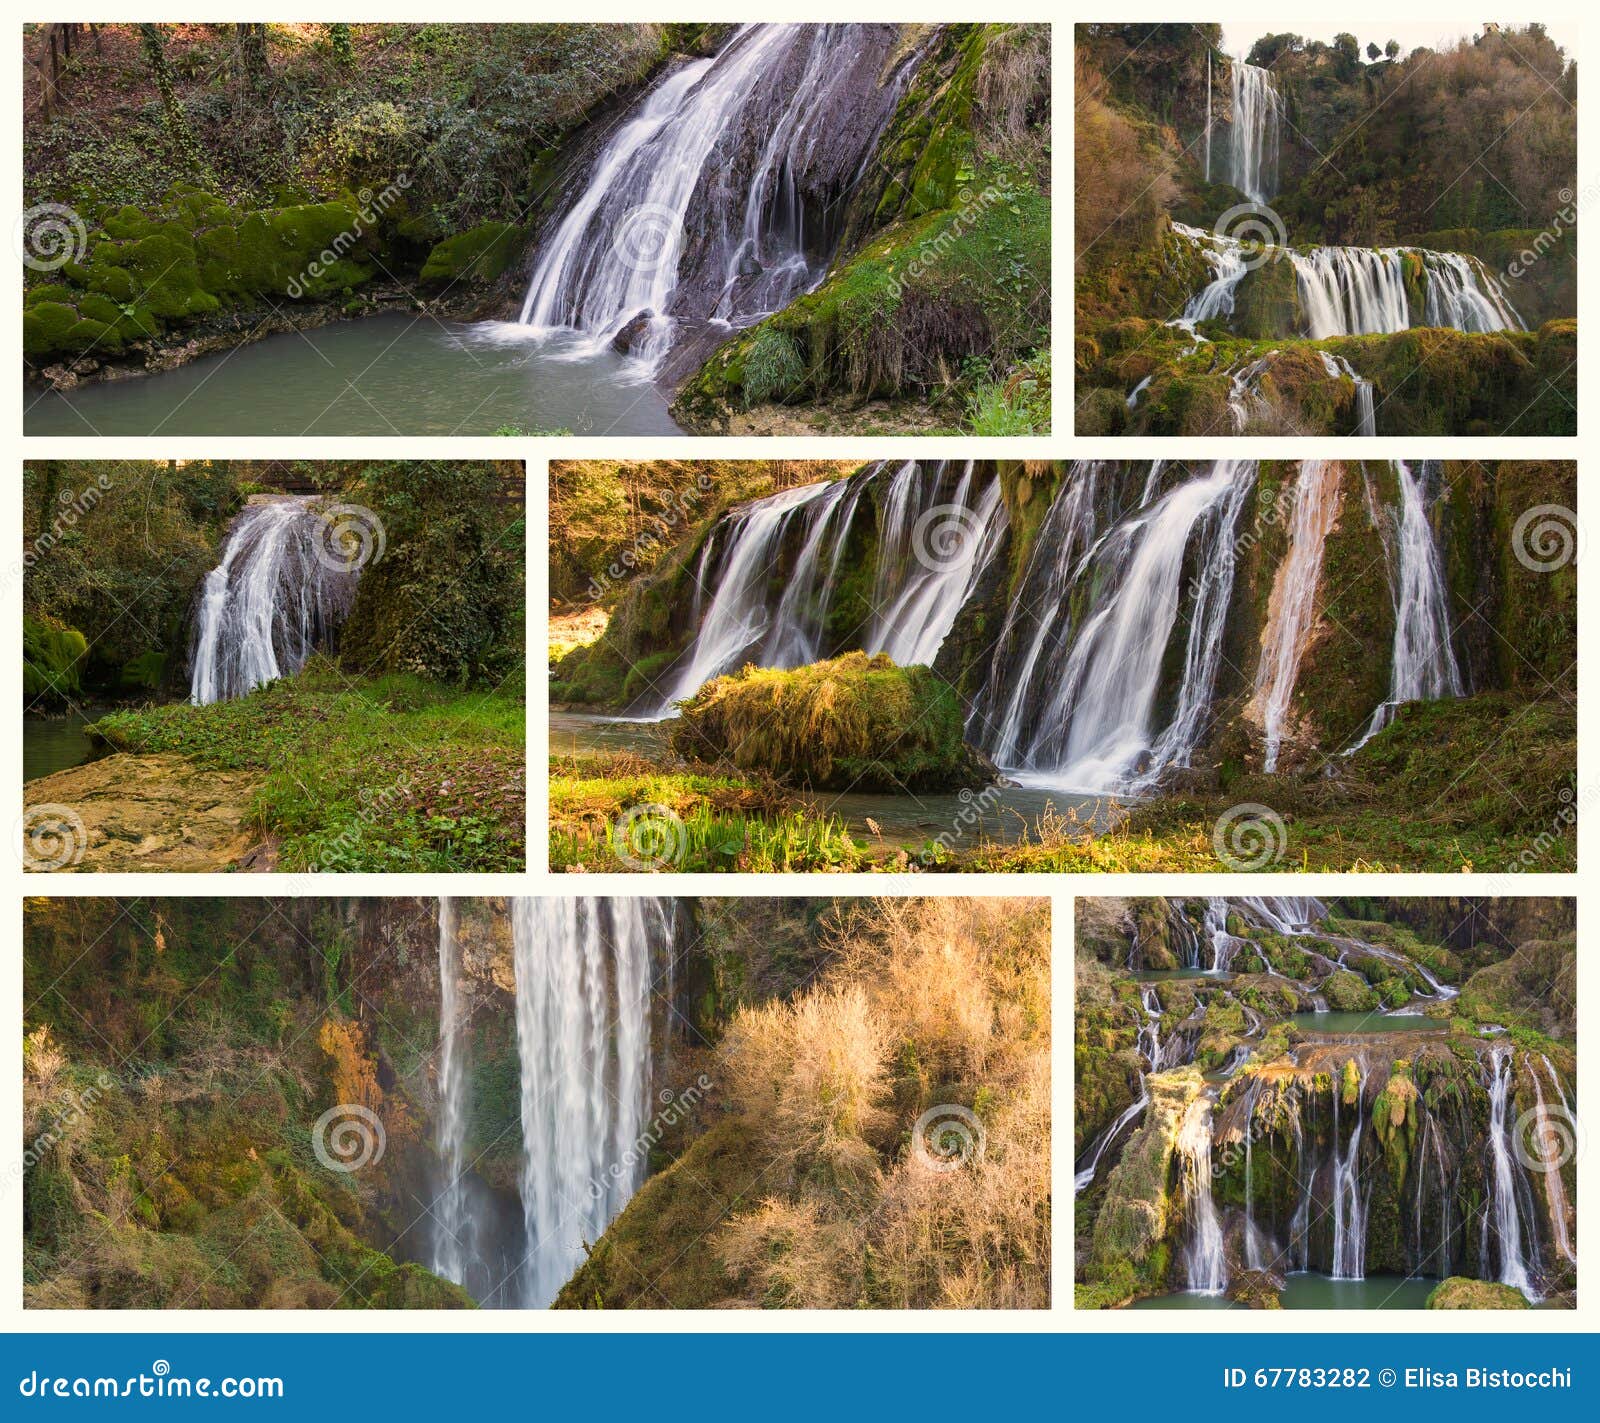 collage with photos of marmore fall (cascata delle marmore)